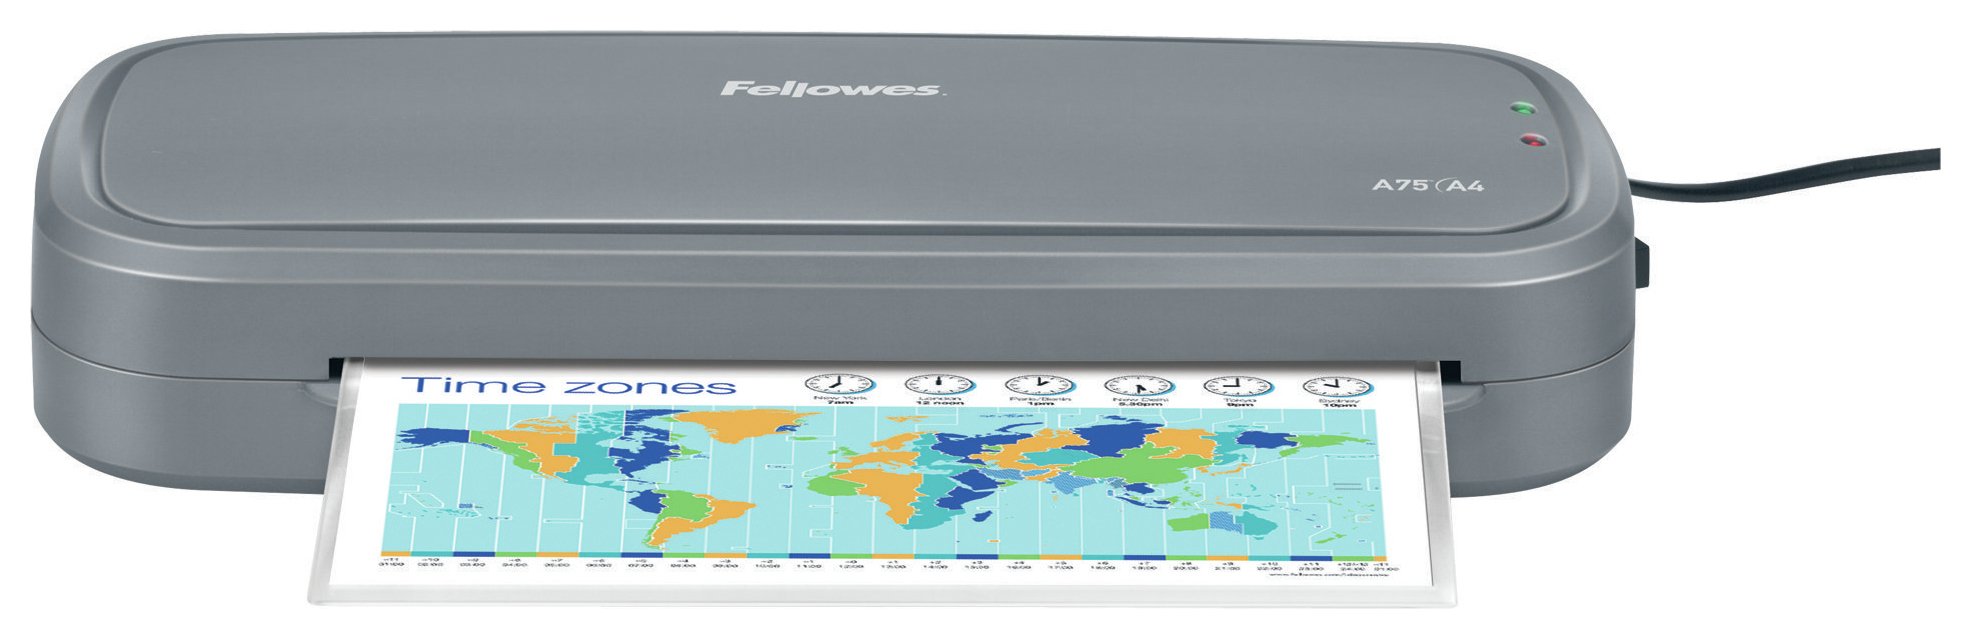 Fellowes A75 A4 Laminator Used NO POUCHES 